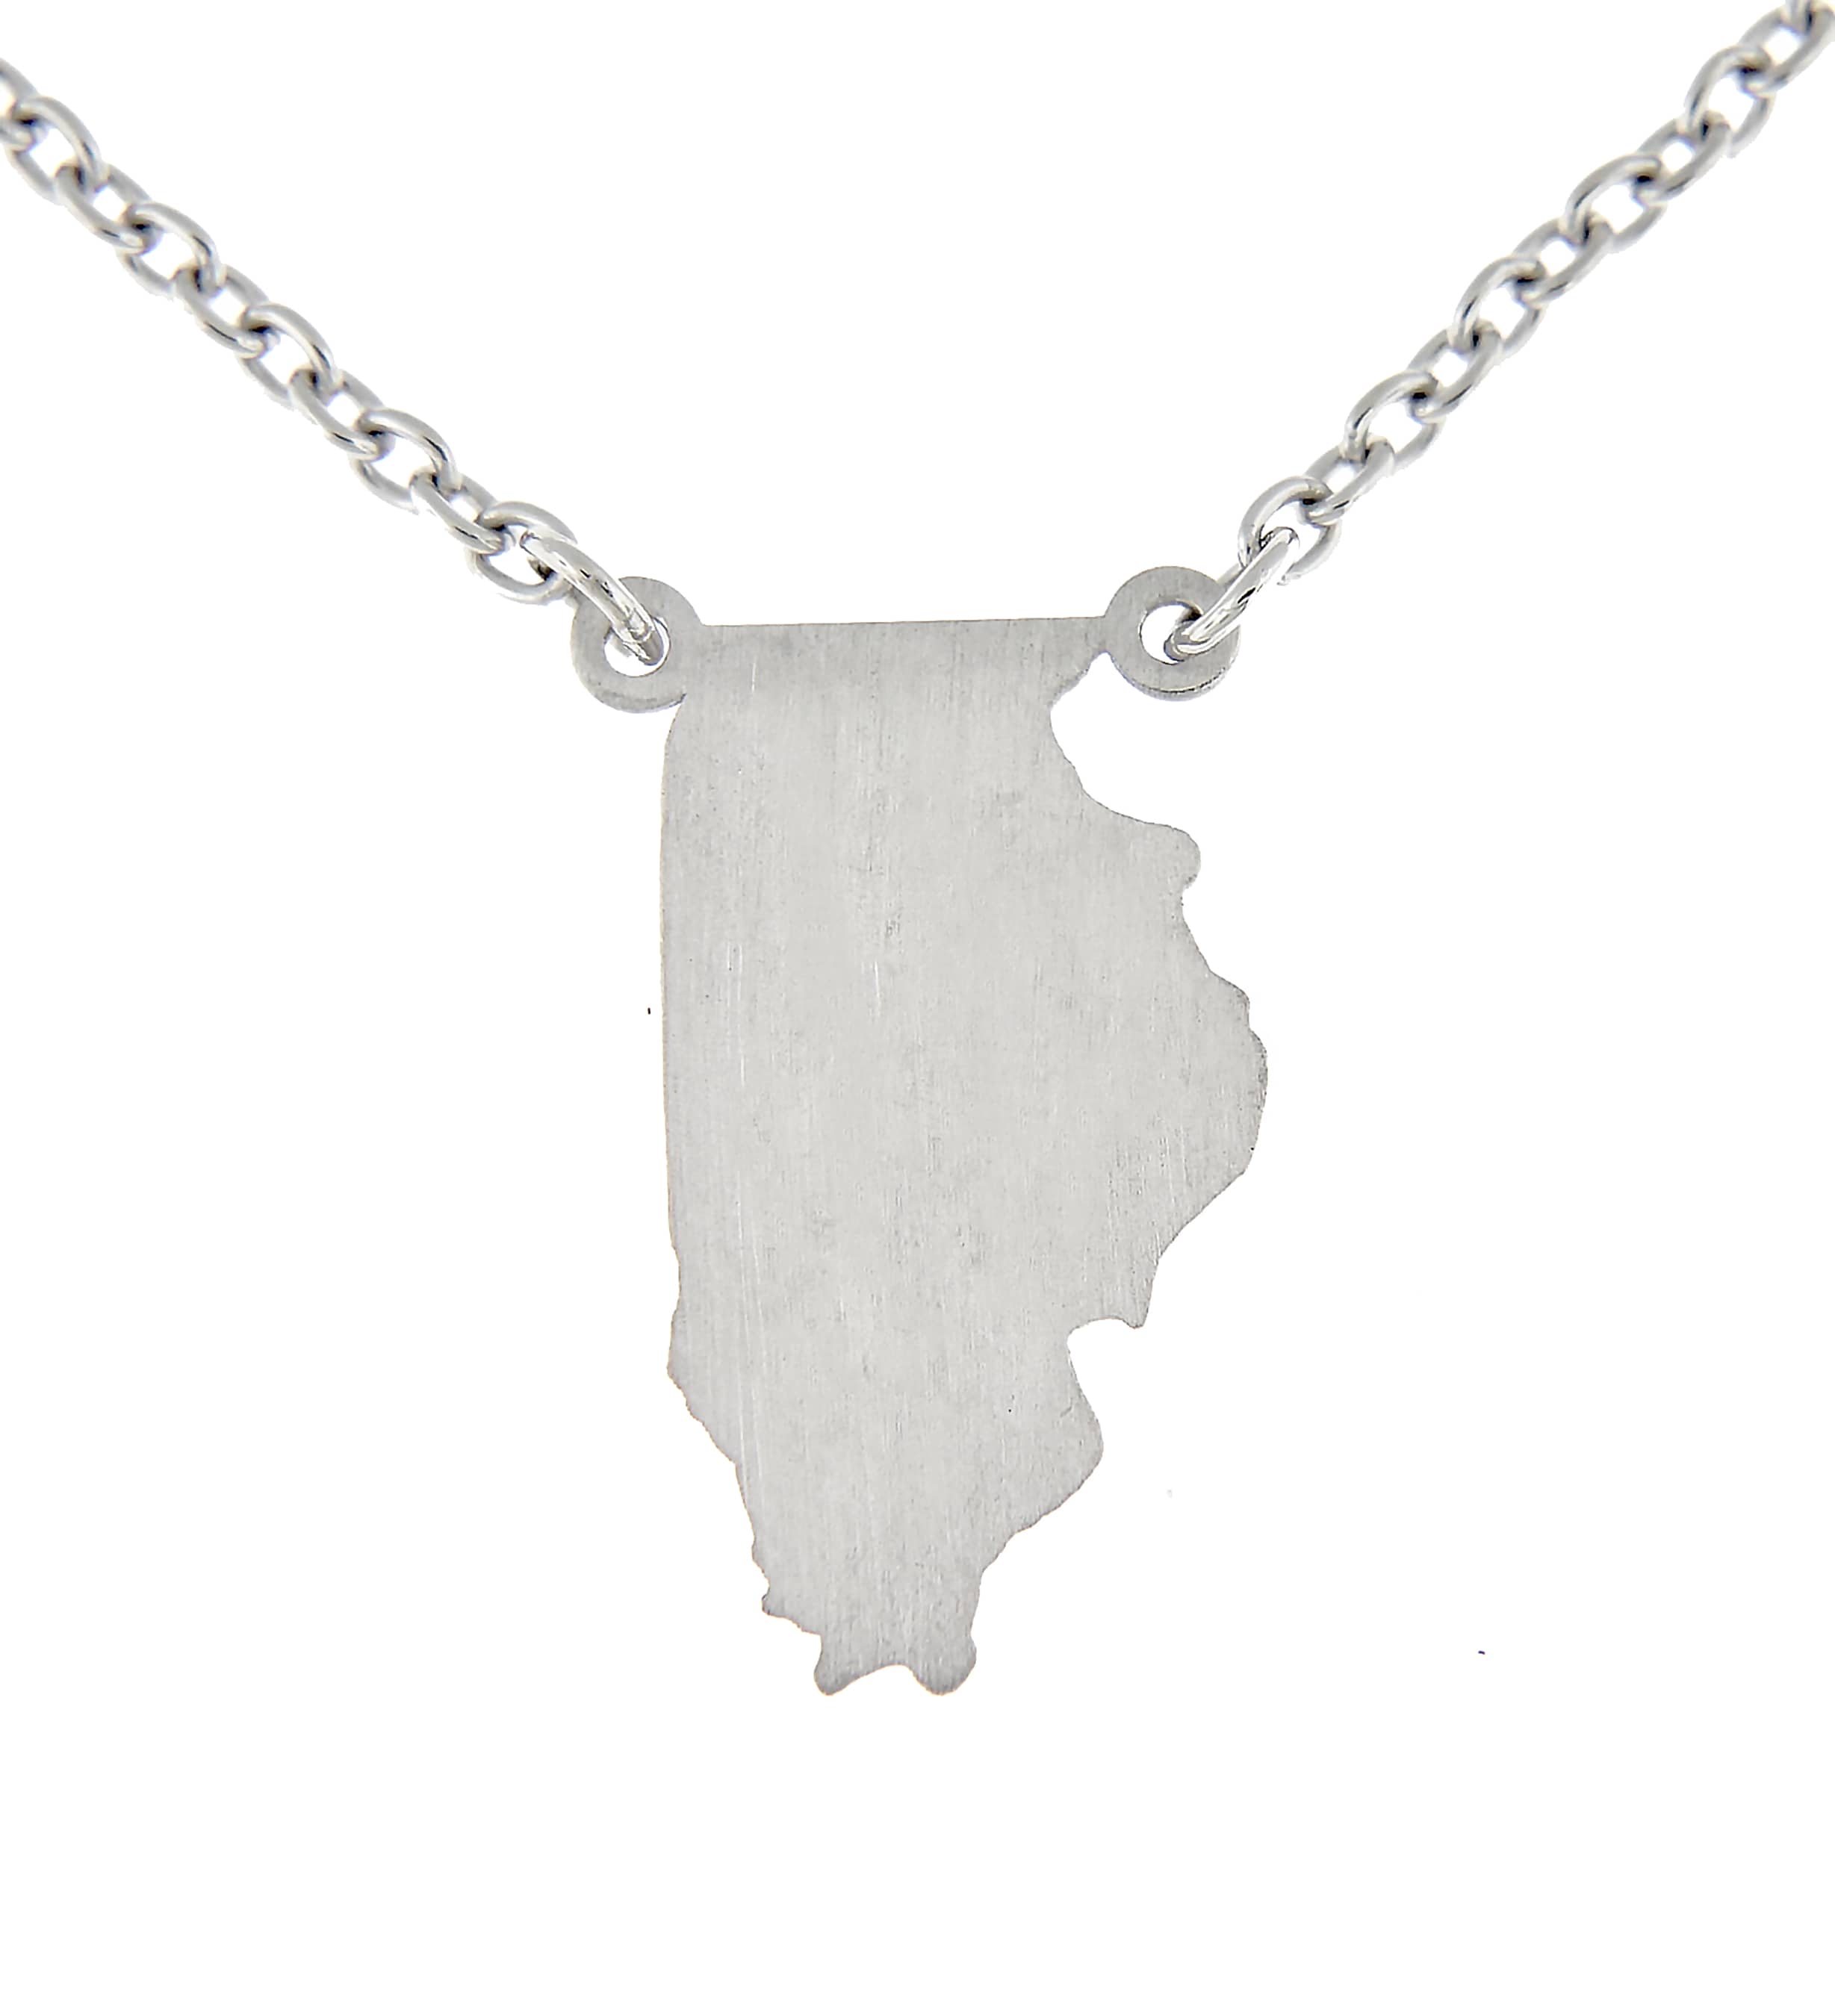 14K Gold or Sterling Silver Illinois IL State Name Necklace Personalized Monogram